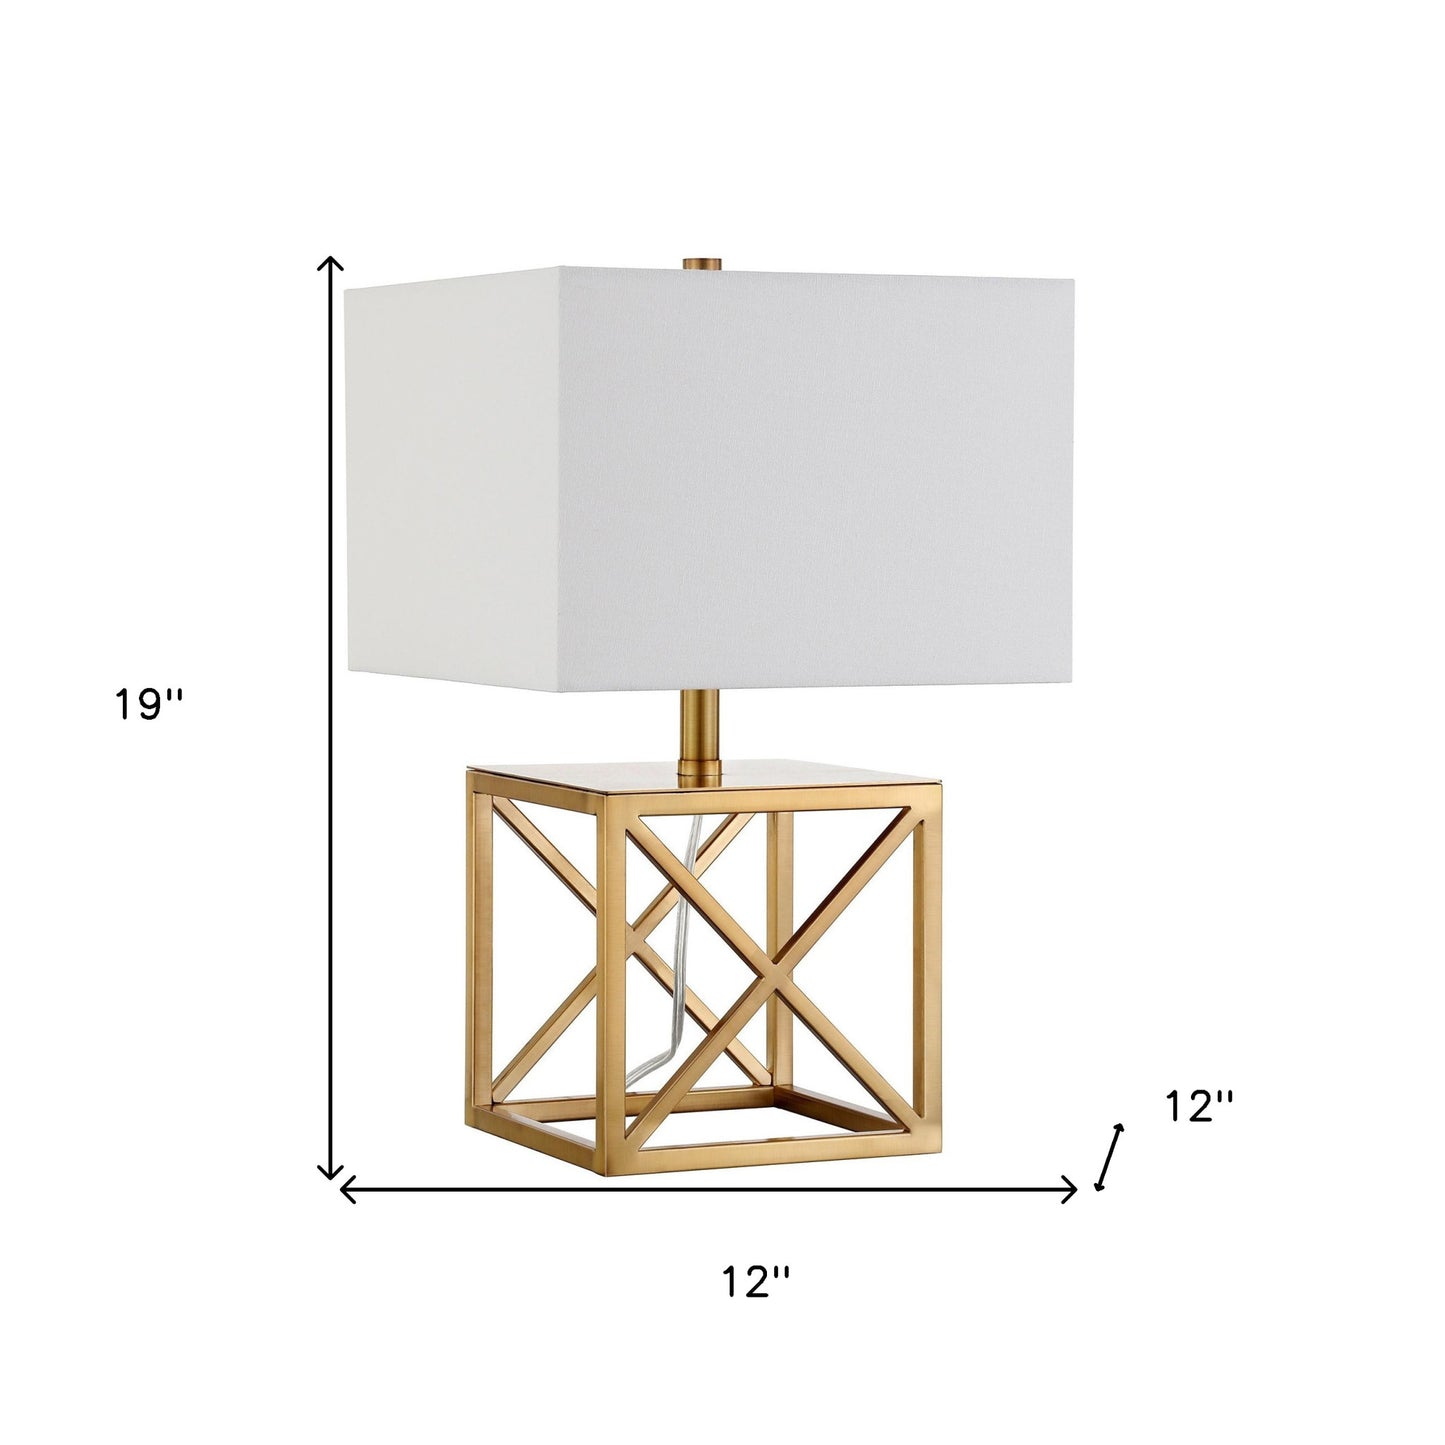 19" Brass Metal Table Lamp With White Square Shade